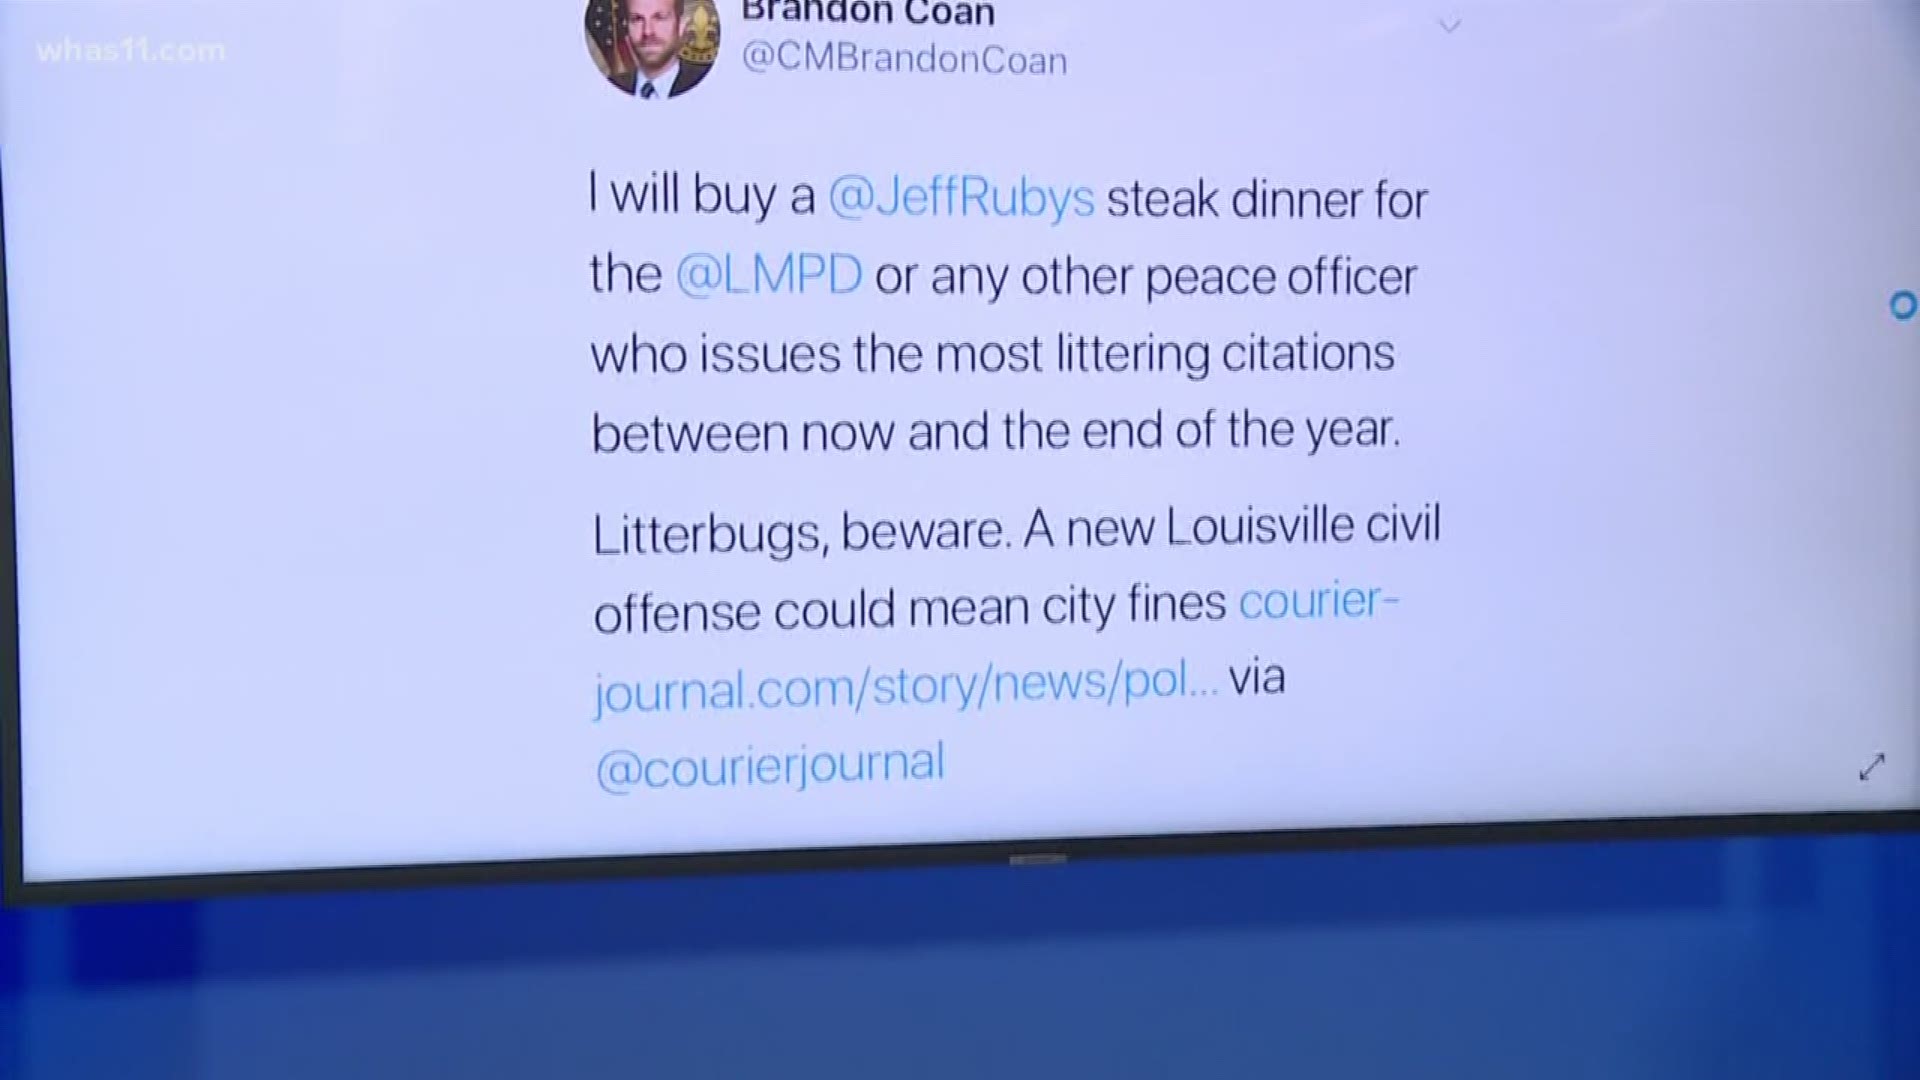 A new ordinance will treat littering as a civil offense, and one metro councilman's tweet about the push is facing criticism.